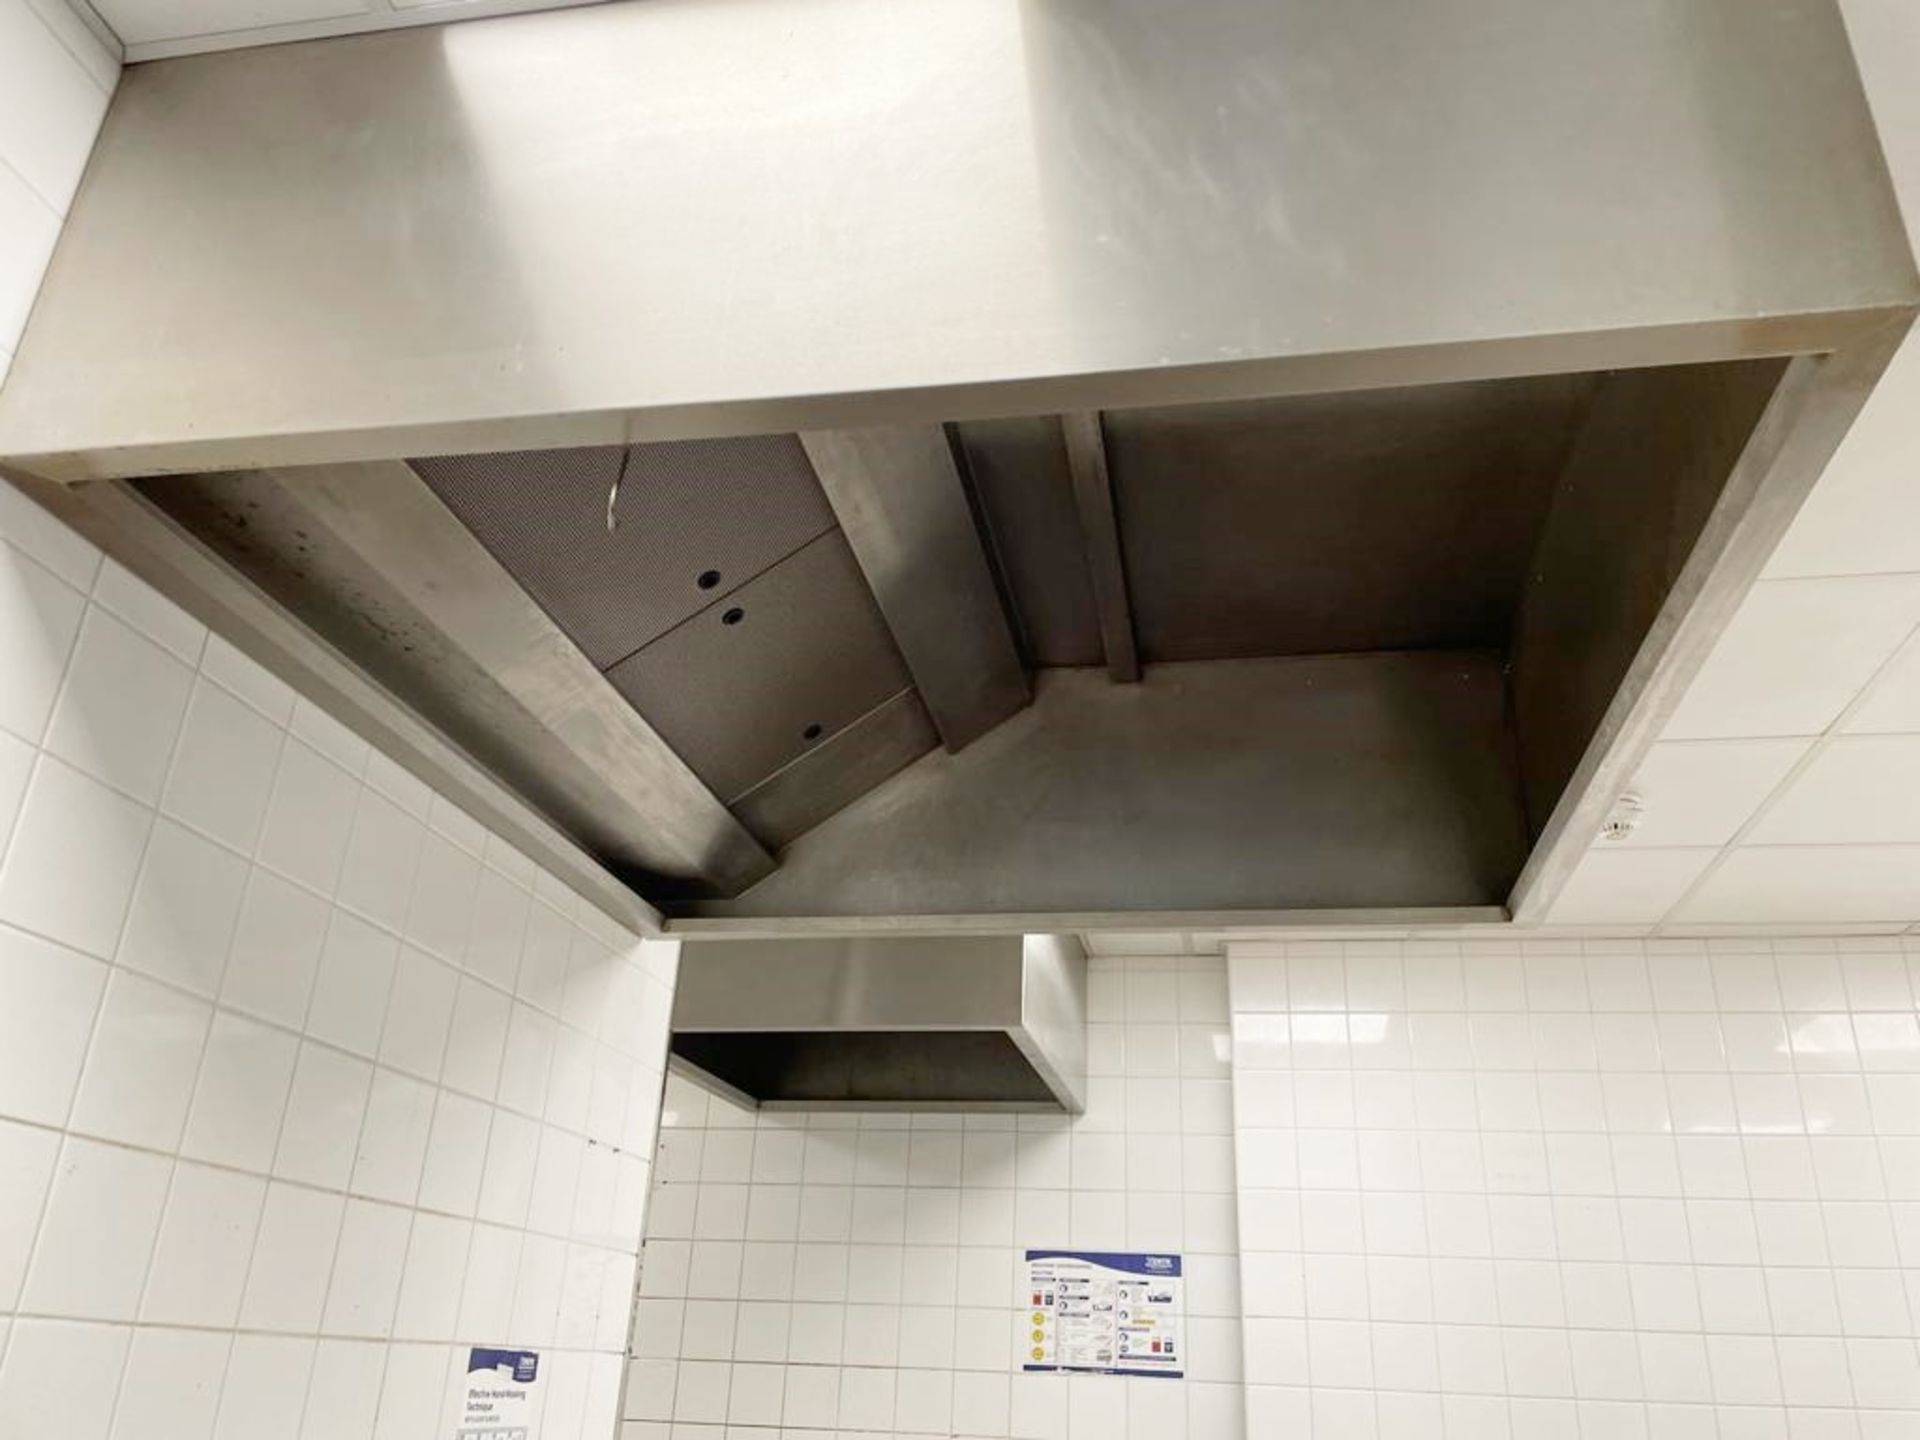 1 x Commercial Kitchen Extractor Canopy With Filters - Stainless Steel - Dimension: H50 x W150 x - Image 4 of 5